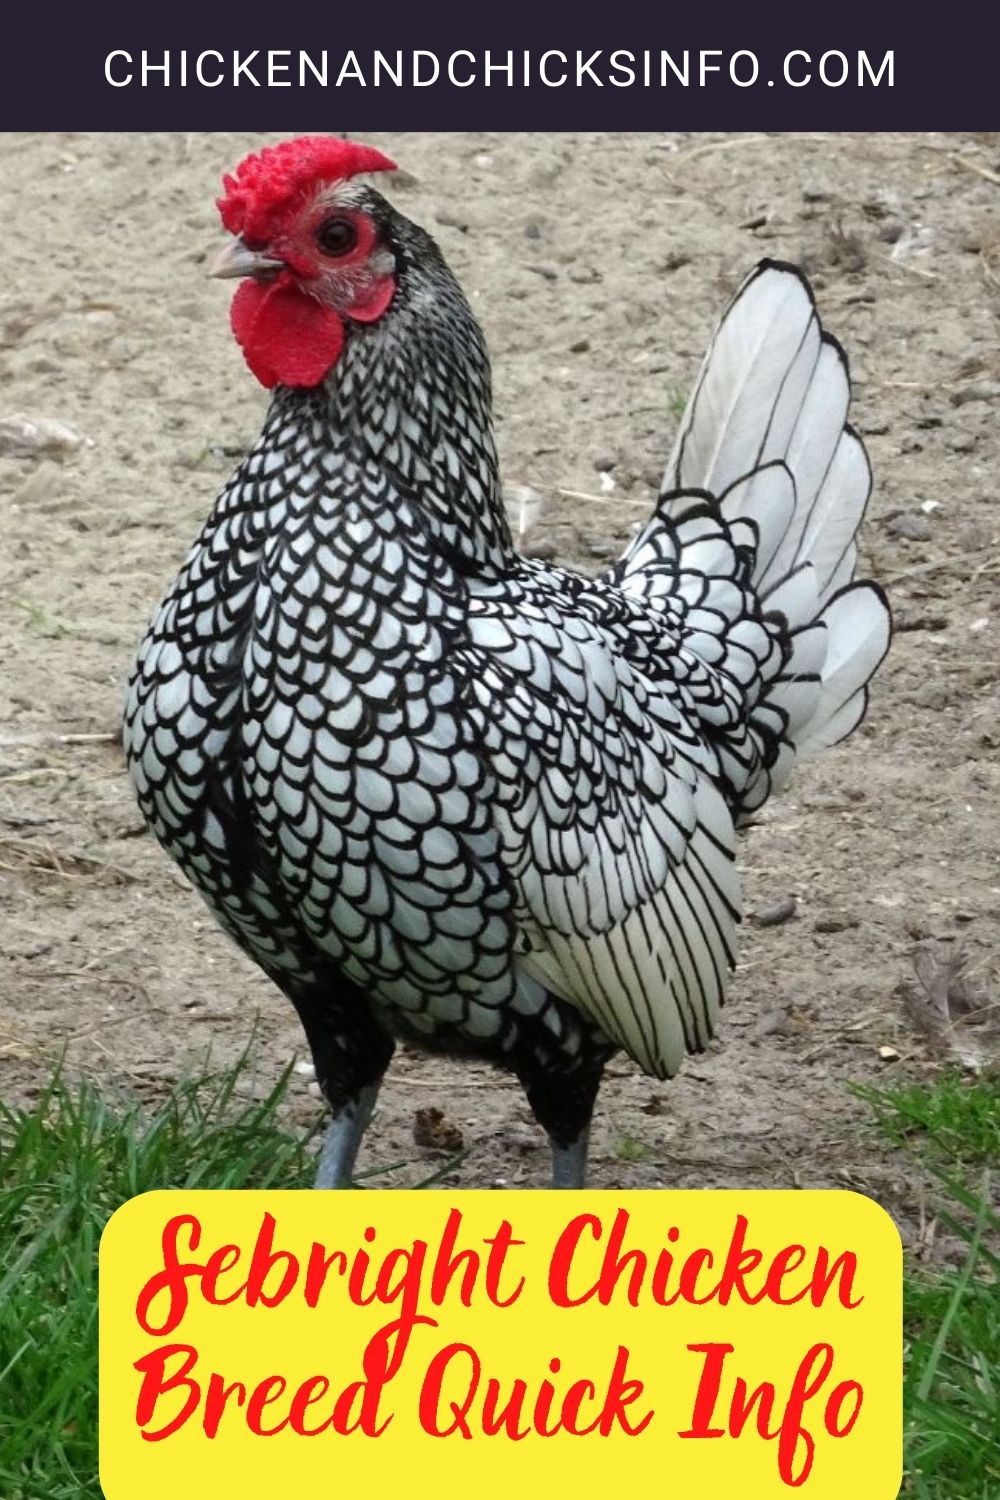 Sebright Chicken Breed Quick Info + Where to Buy pinterest image.